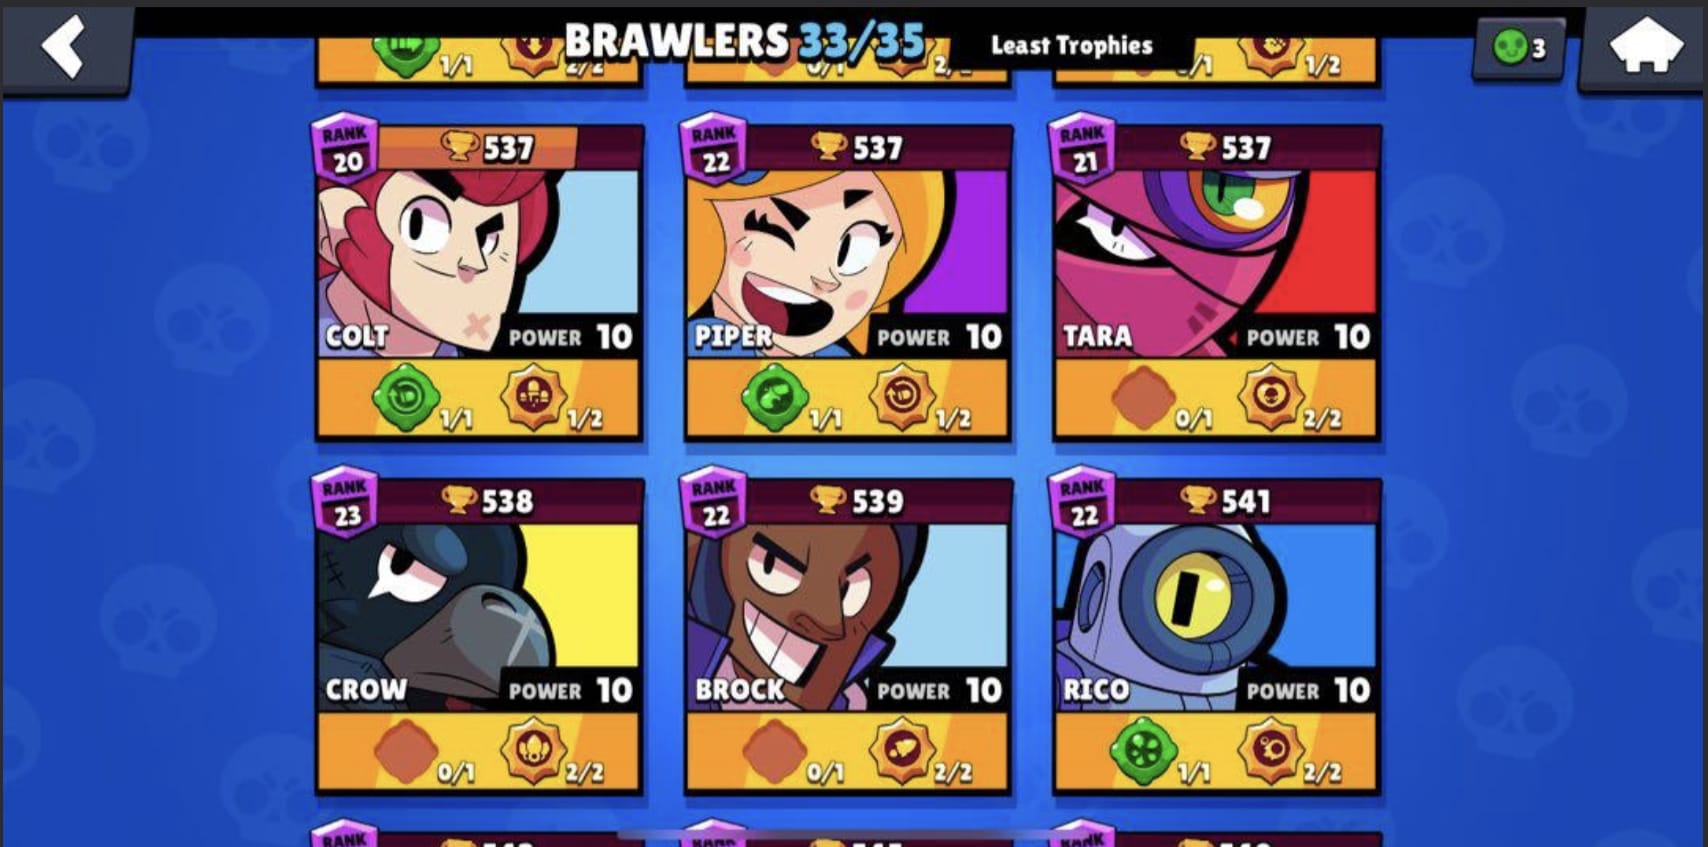 Get You 1000 More Trophies In Brawl Stars Or Clash Royale By Cokeyoutube Fiverr - brawl stars trophies over 1000